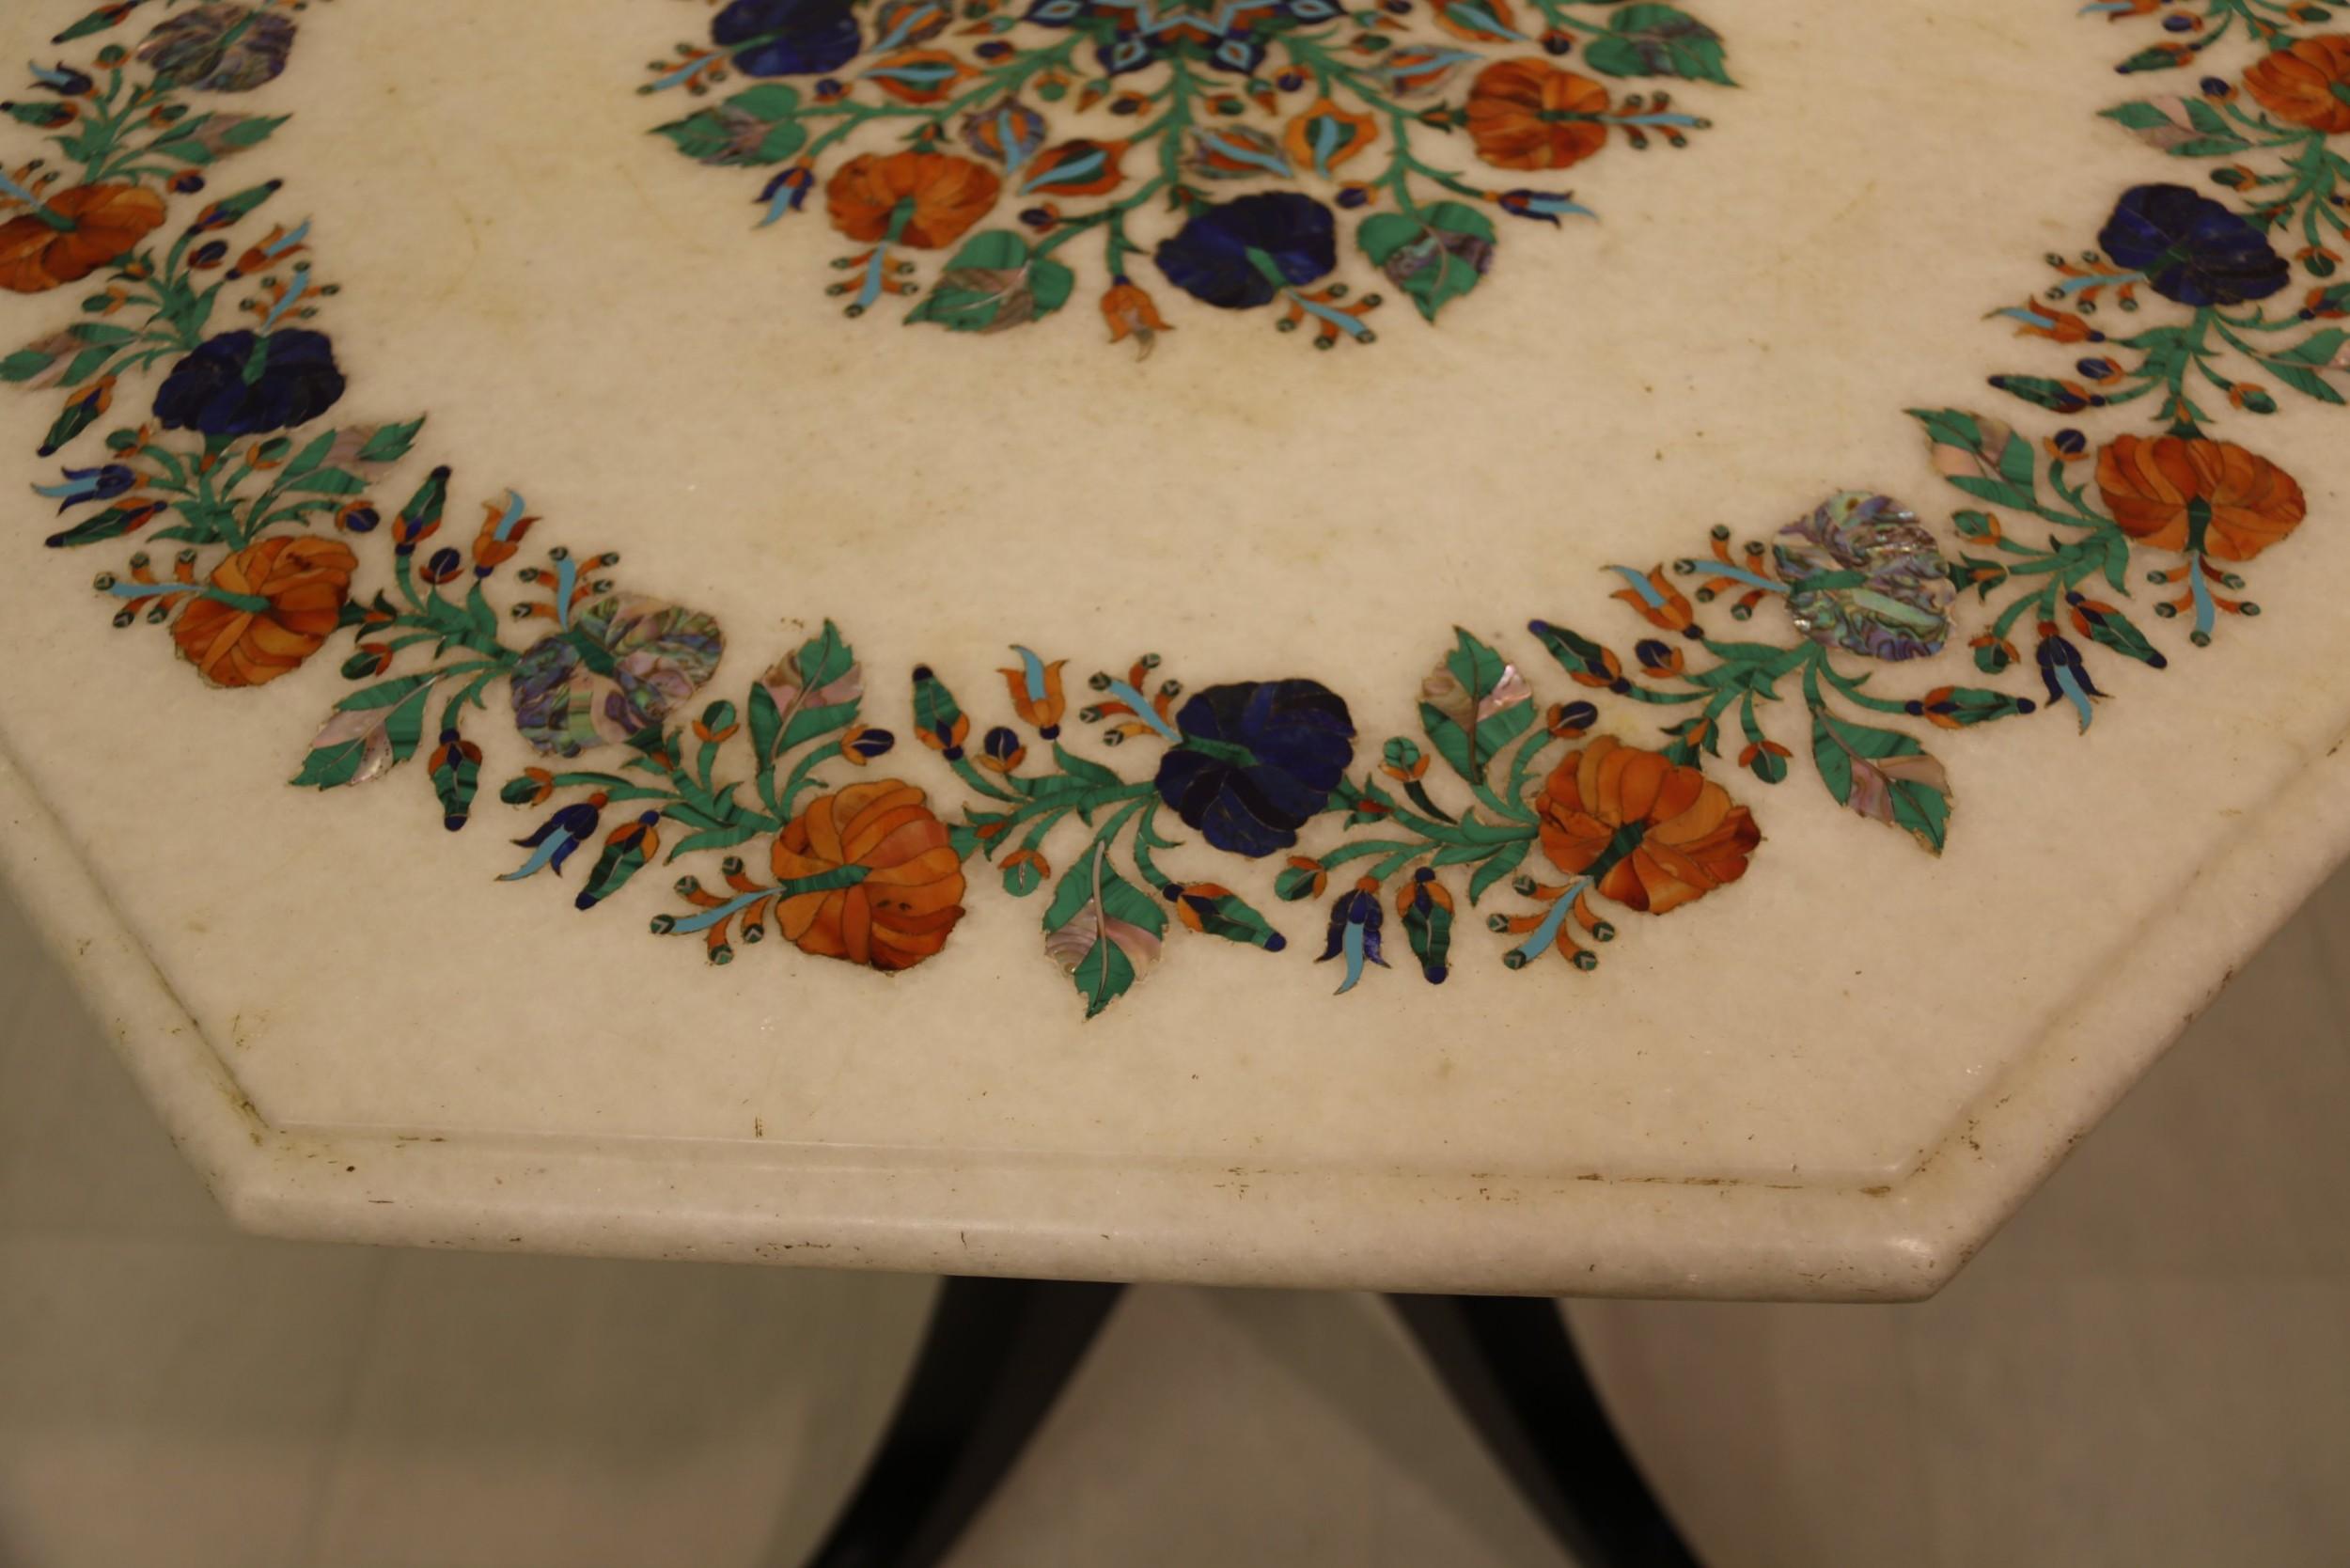 This high quality decorative piece is made up of a very fine Indian white marble octagonal tabletop decorated with inlaid semi-precious cut stones forming a floral design with malachite, lapis, agate, turquoise, and mother of pearl.
The tabletop is